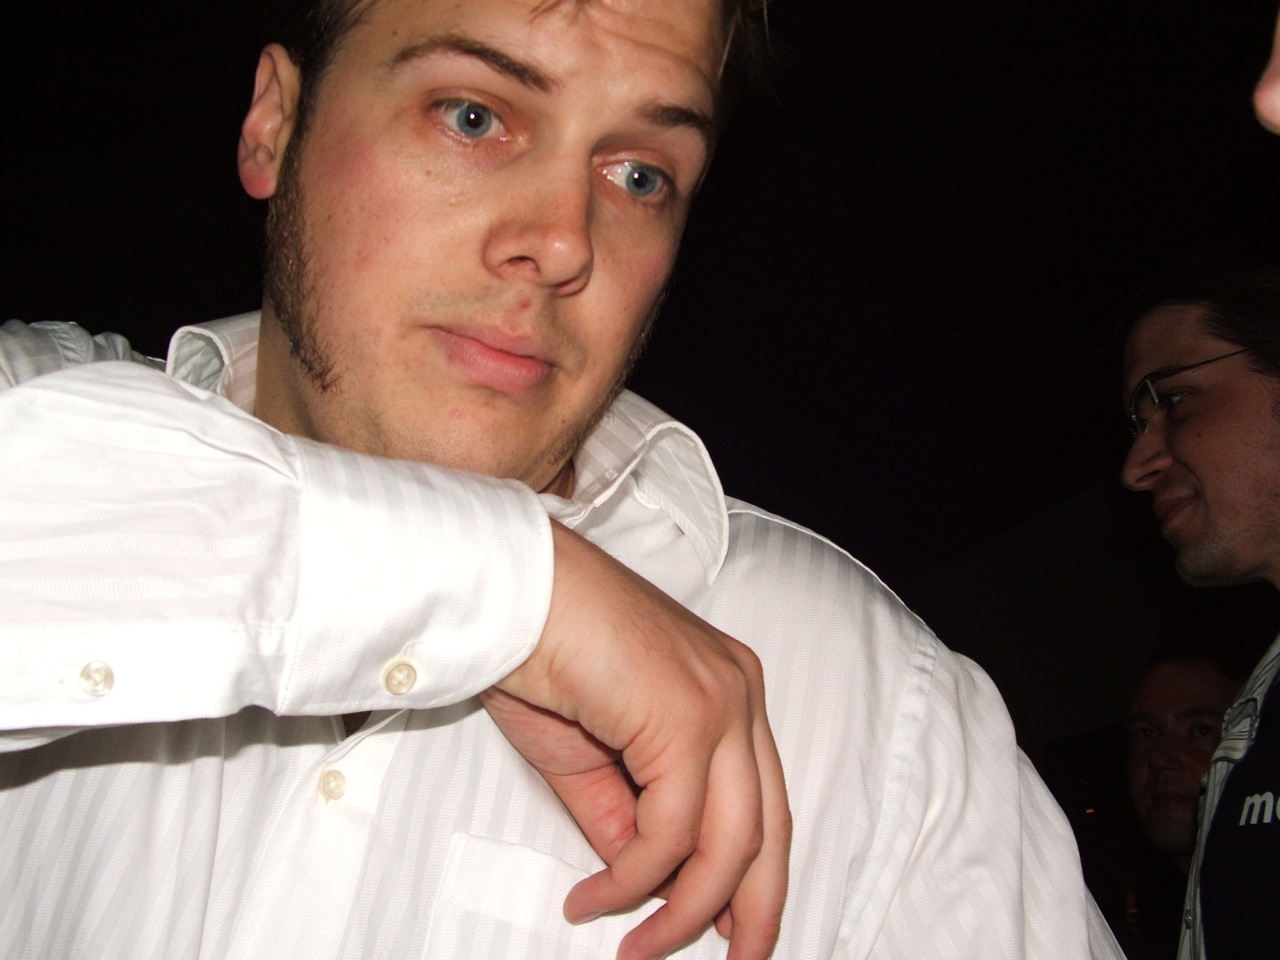 a man wearing a white shirt holding his elbow